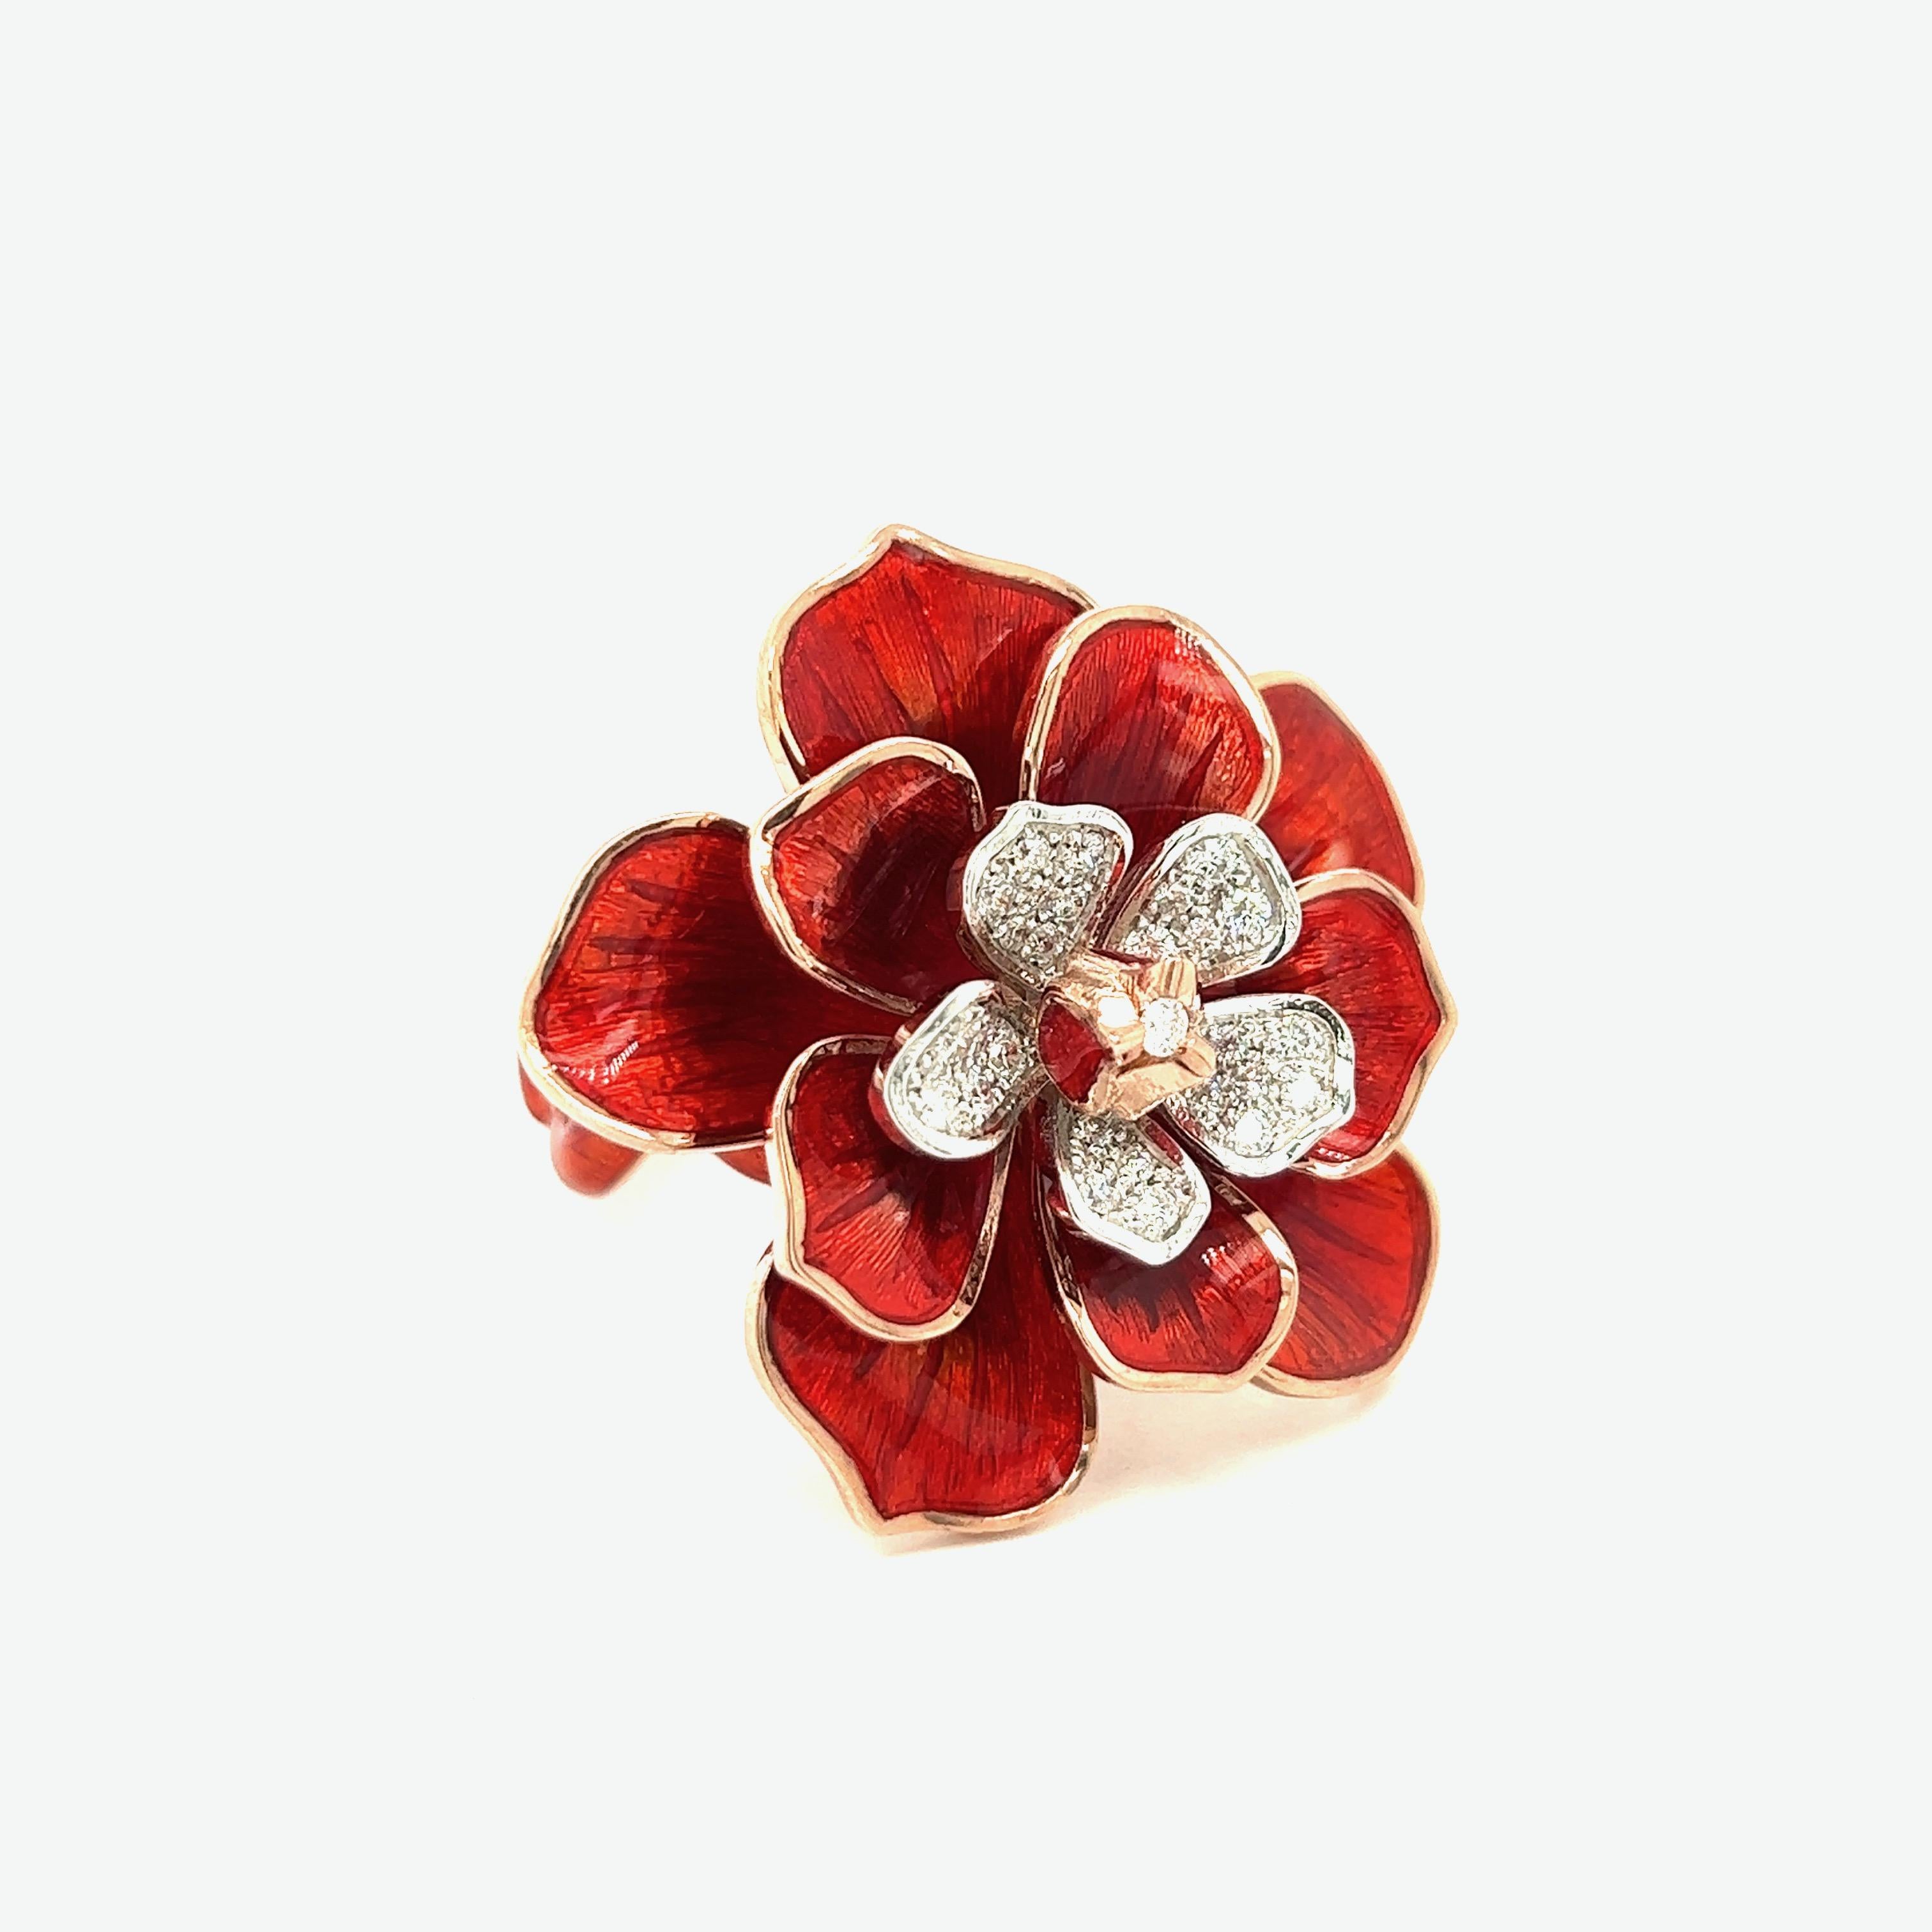 Alexis NY Red Enamel Flower Ring

Small round-cut diamonds of 1 carat, transparent red enamel, set on 18 karat rose gold and sterling silver; marked Alexis NY, 750, 925

Size: 7.75 US; top width 3.5 cm
Total weight: 22.6 grams